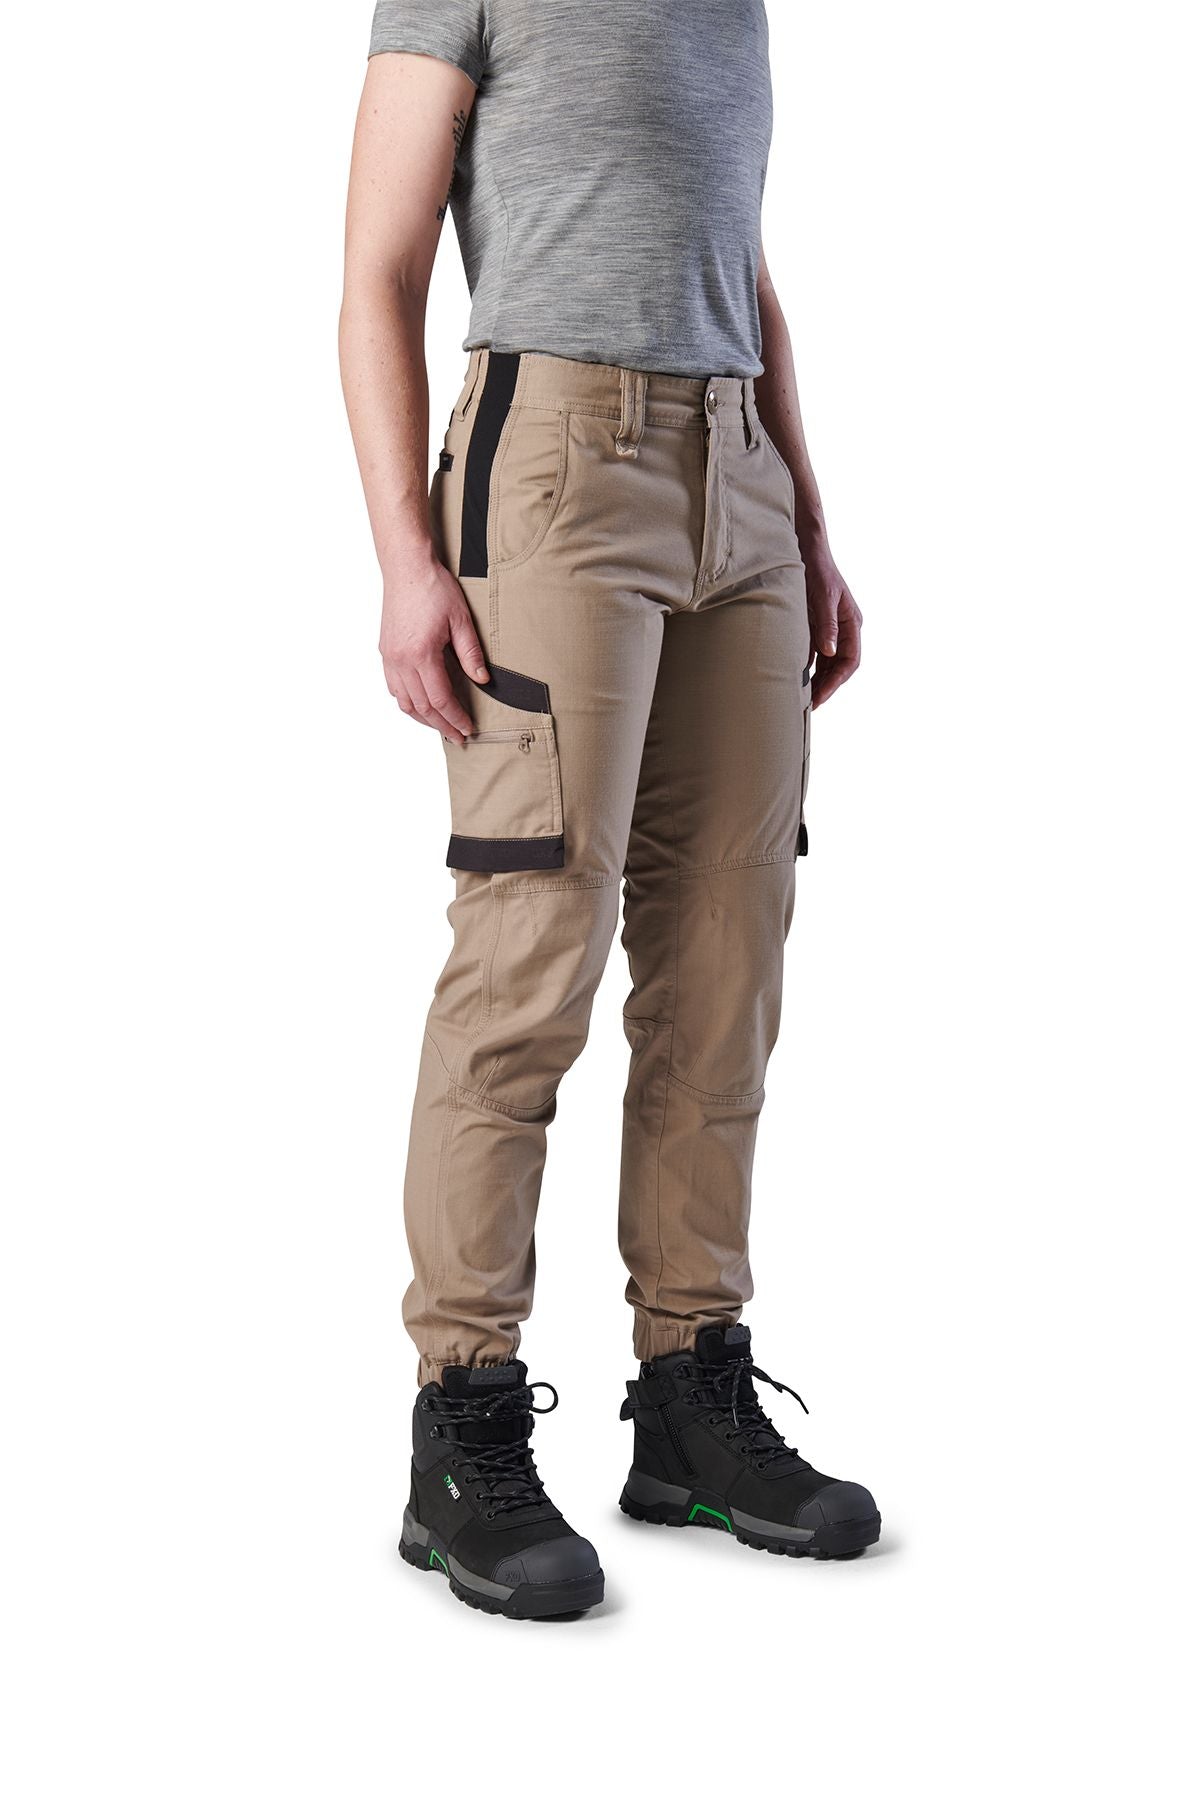 FXD WP8W Womens Cuffed Lightweight Ripstop Work Pant